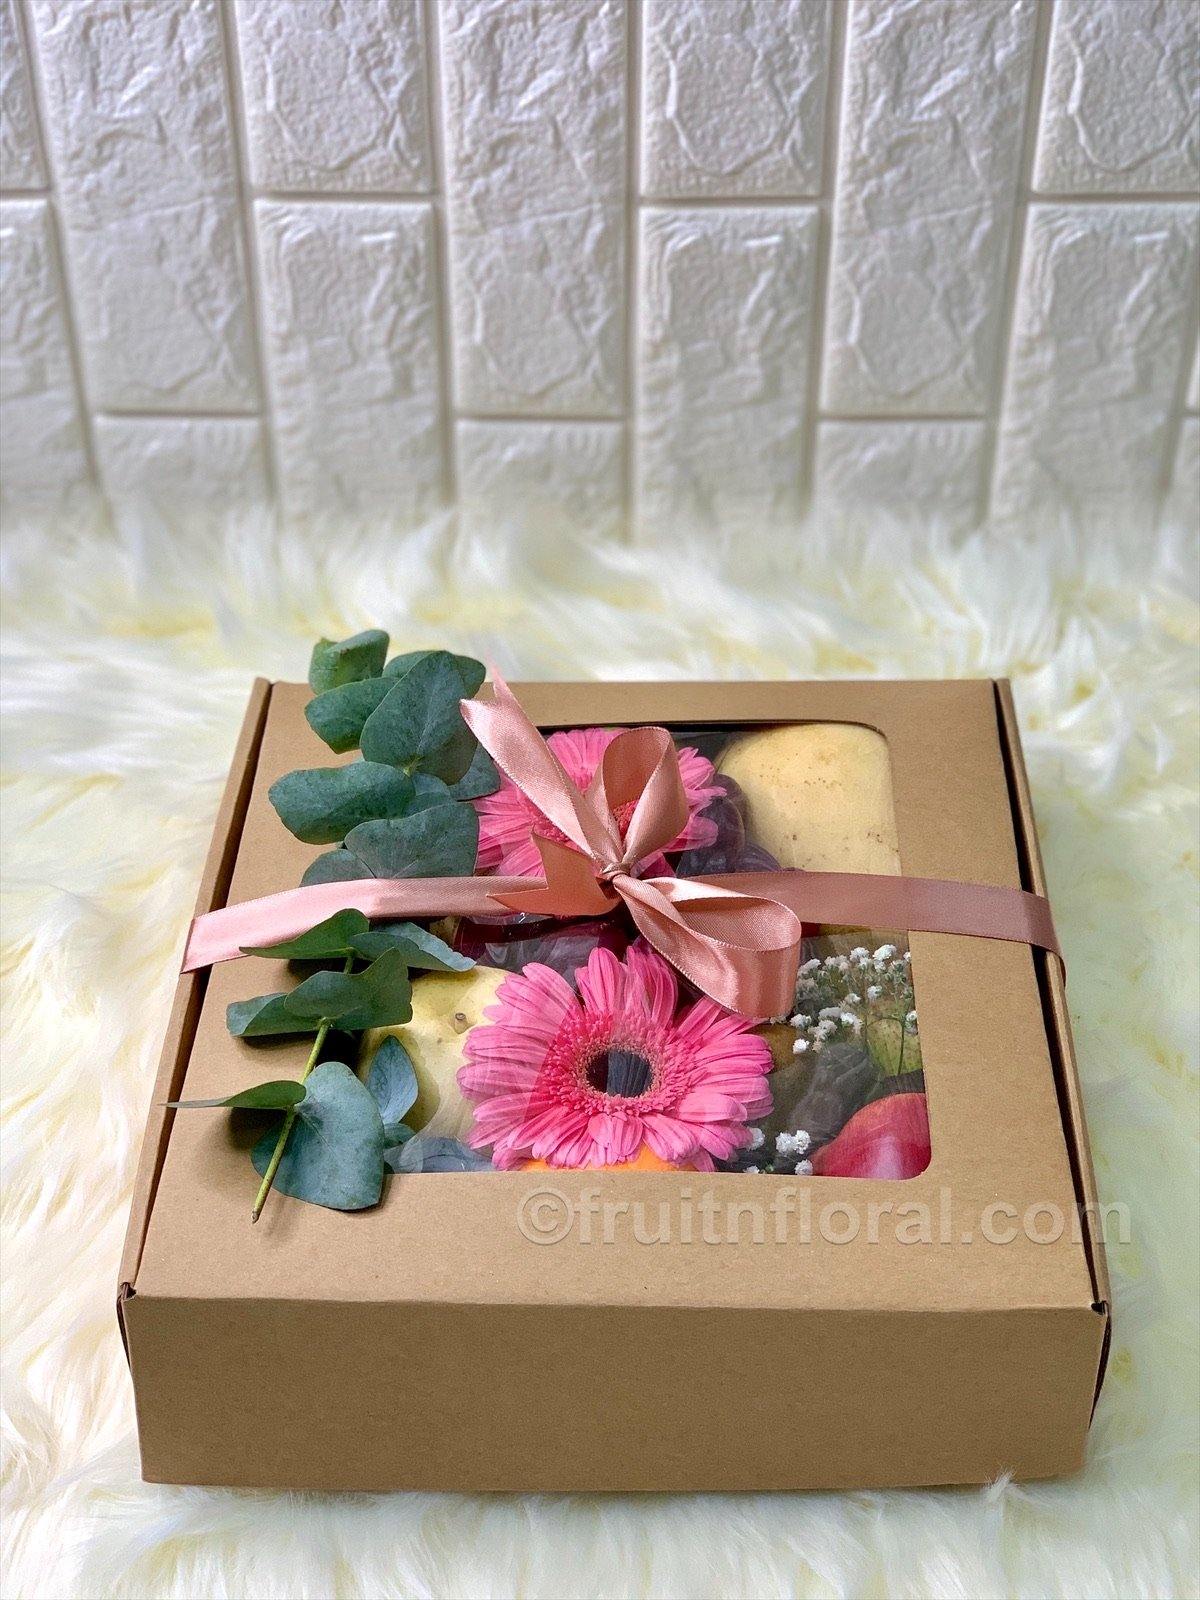 Fruit Lover Box with Bird's Nest - Fruit n Floral